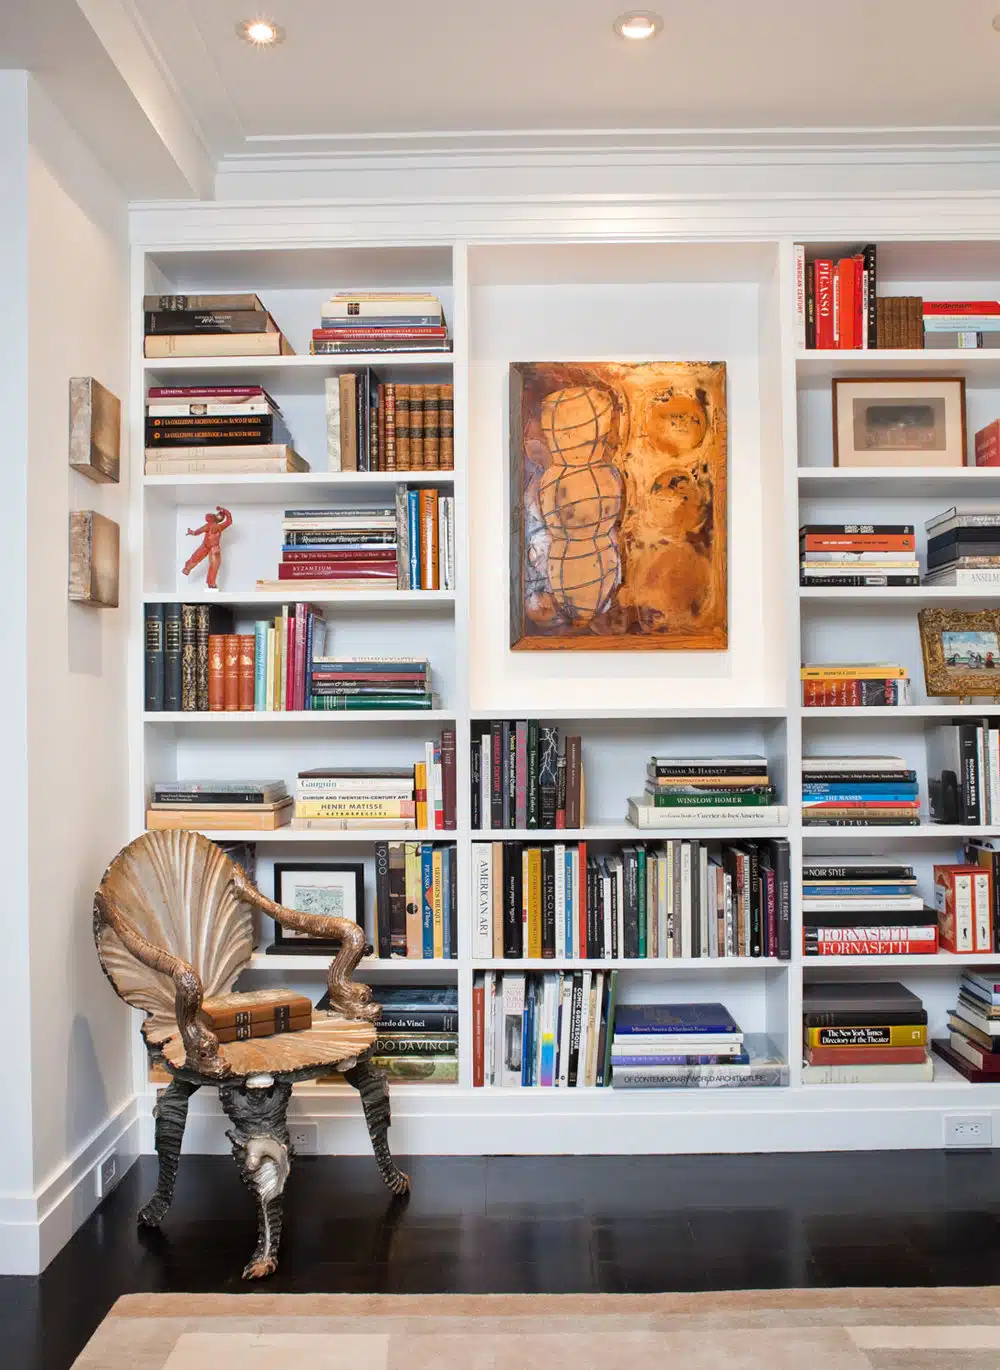 Elegant bookshelf with unique chair and artwork in home office.